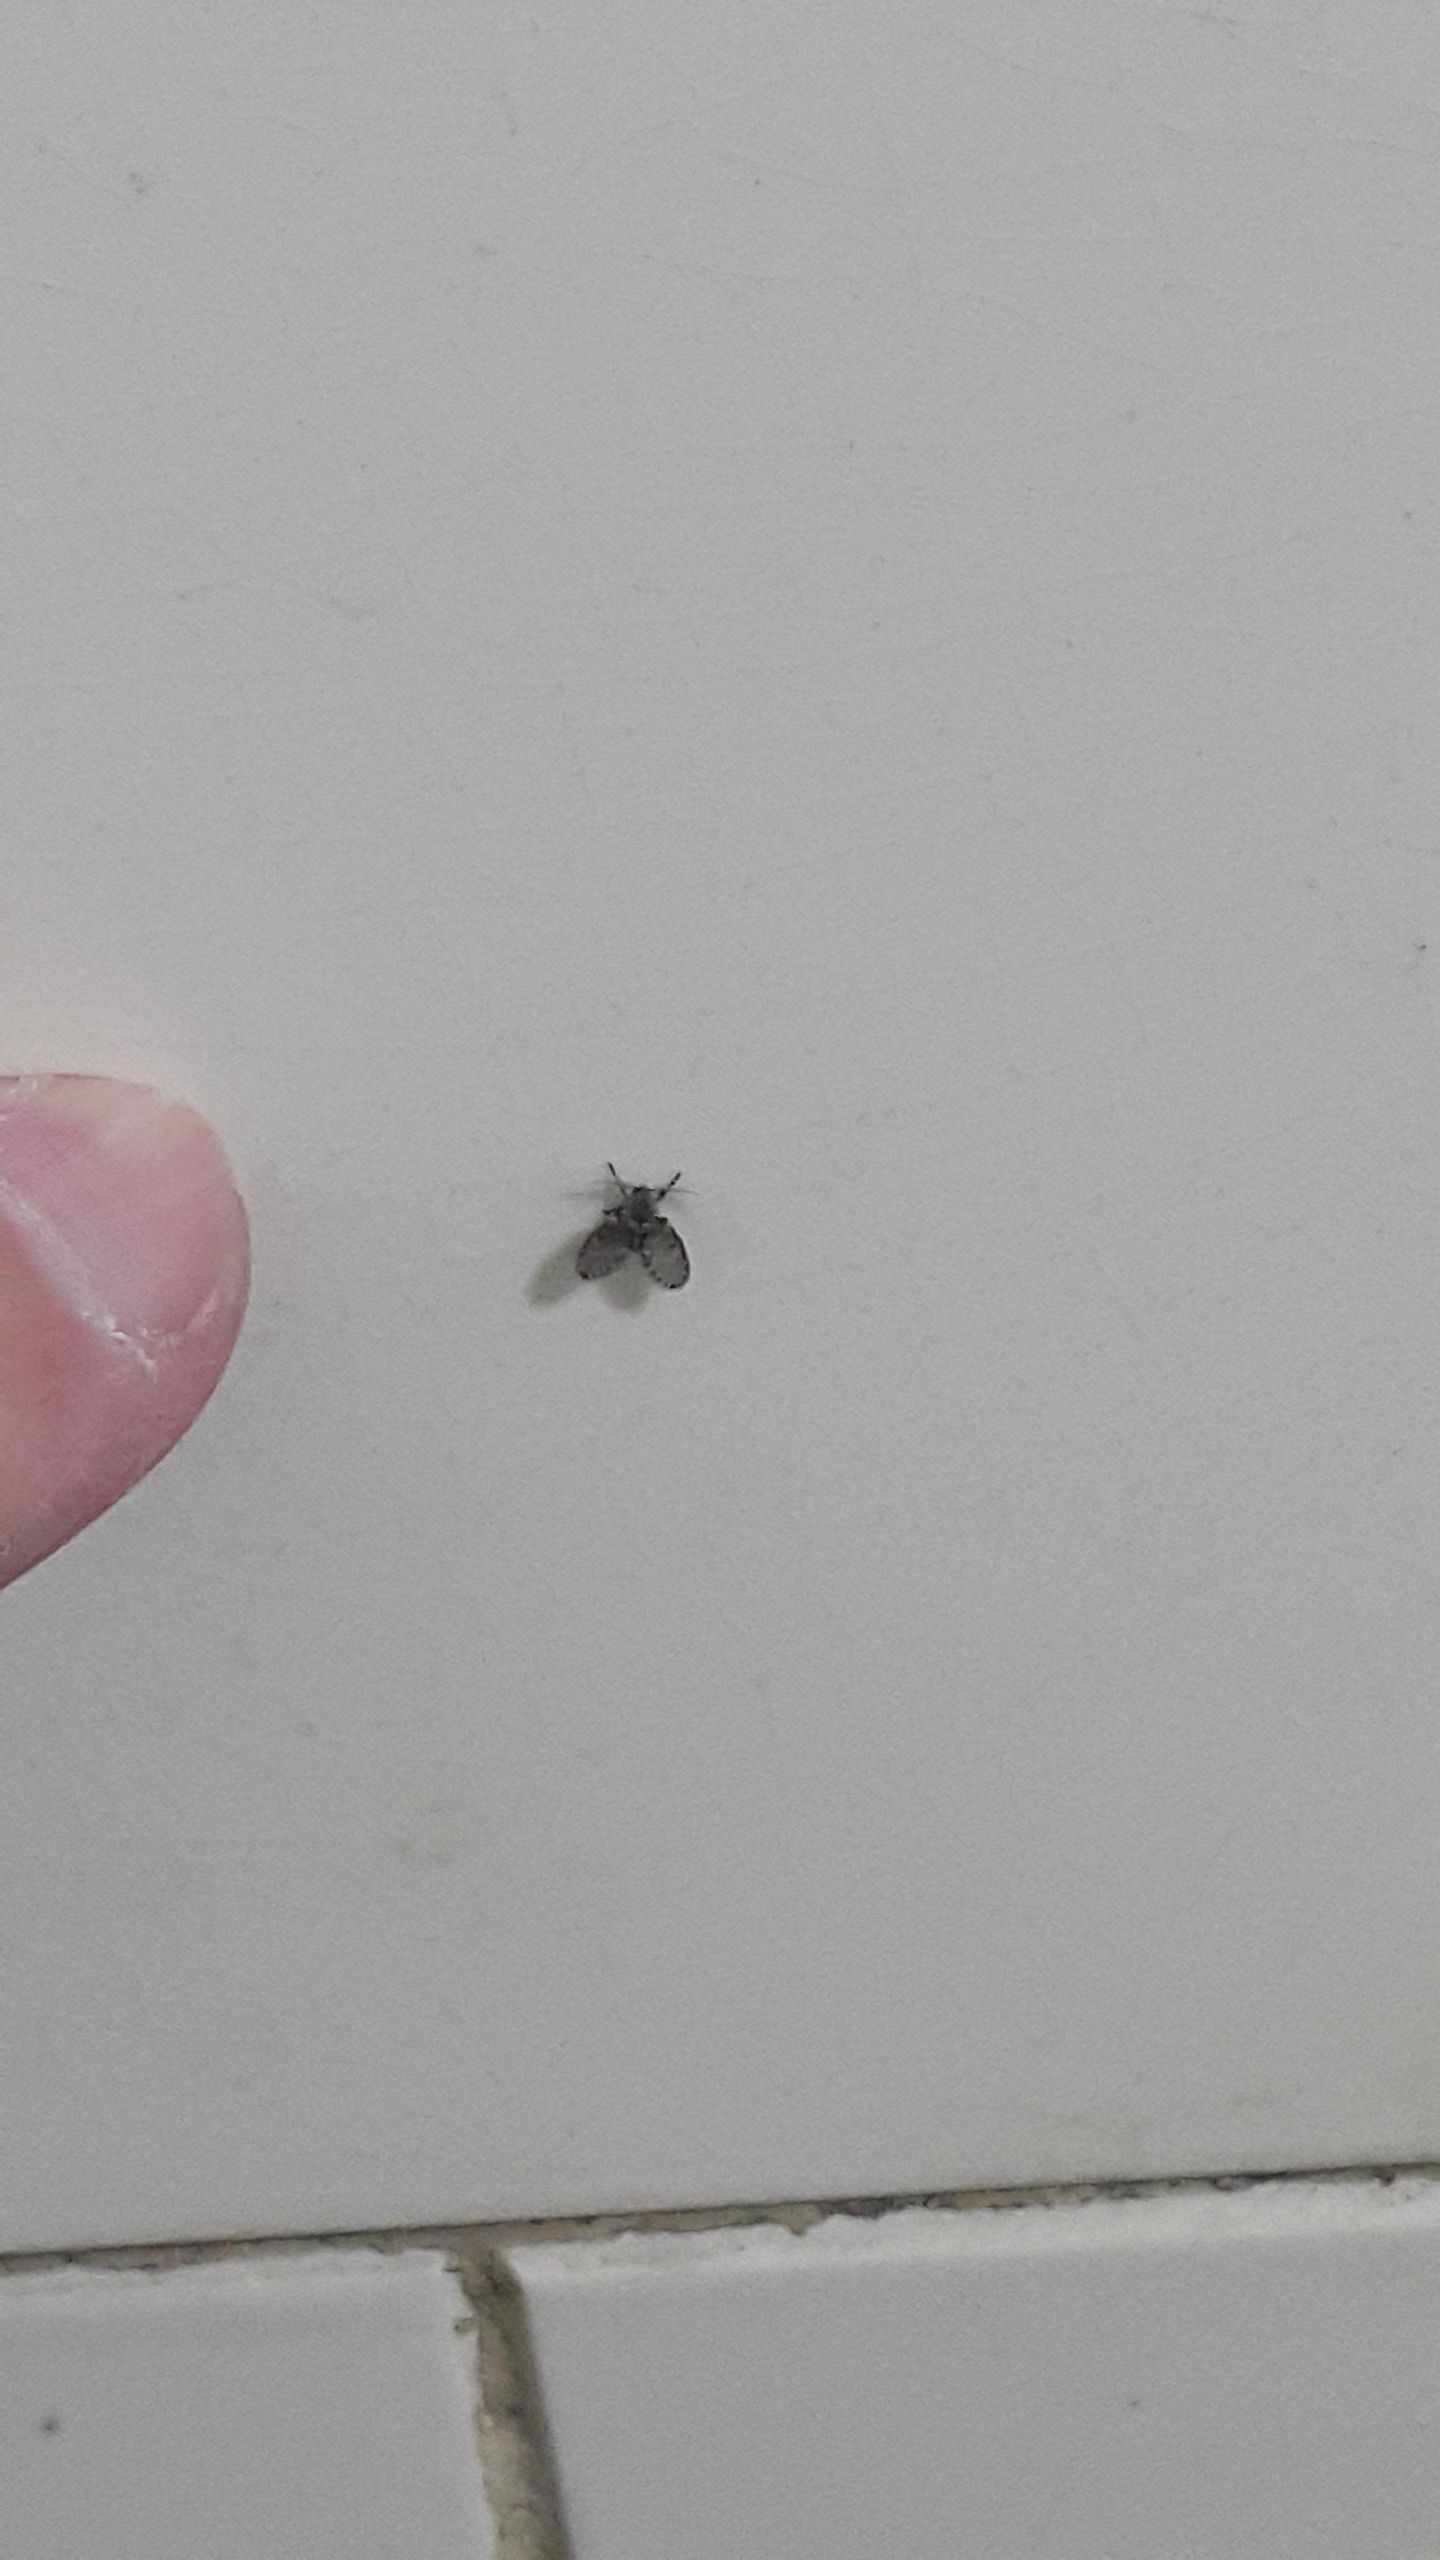 Small Black Flies In Bathroom
 Small black fly seems to like humidity and bathroom tiles